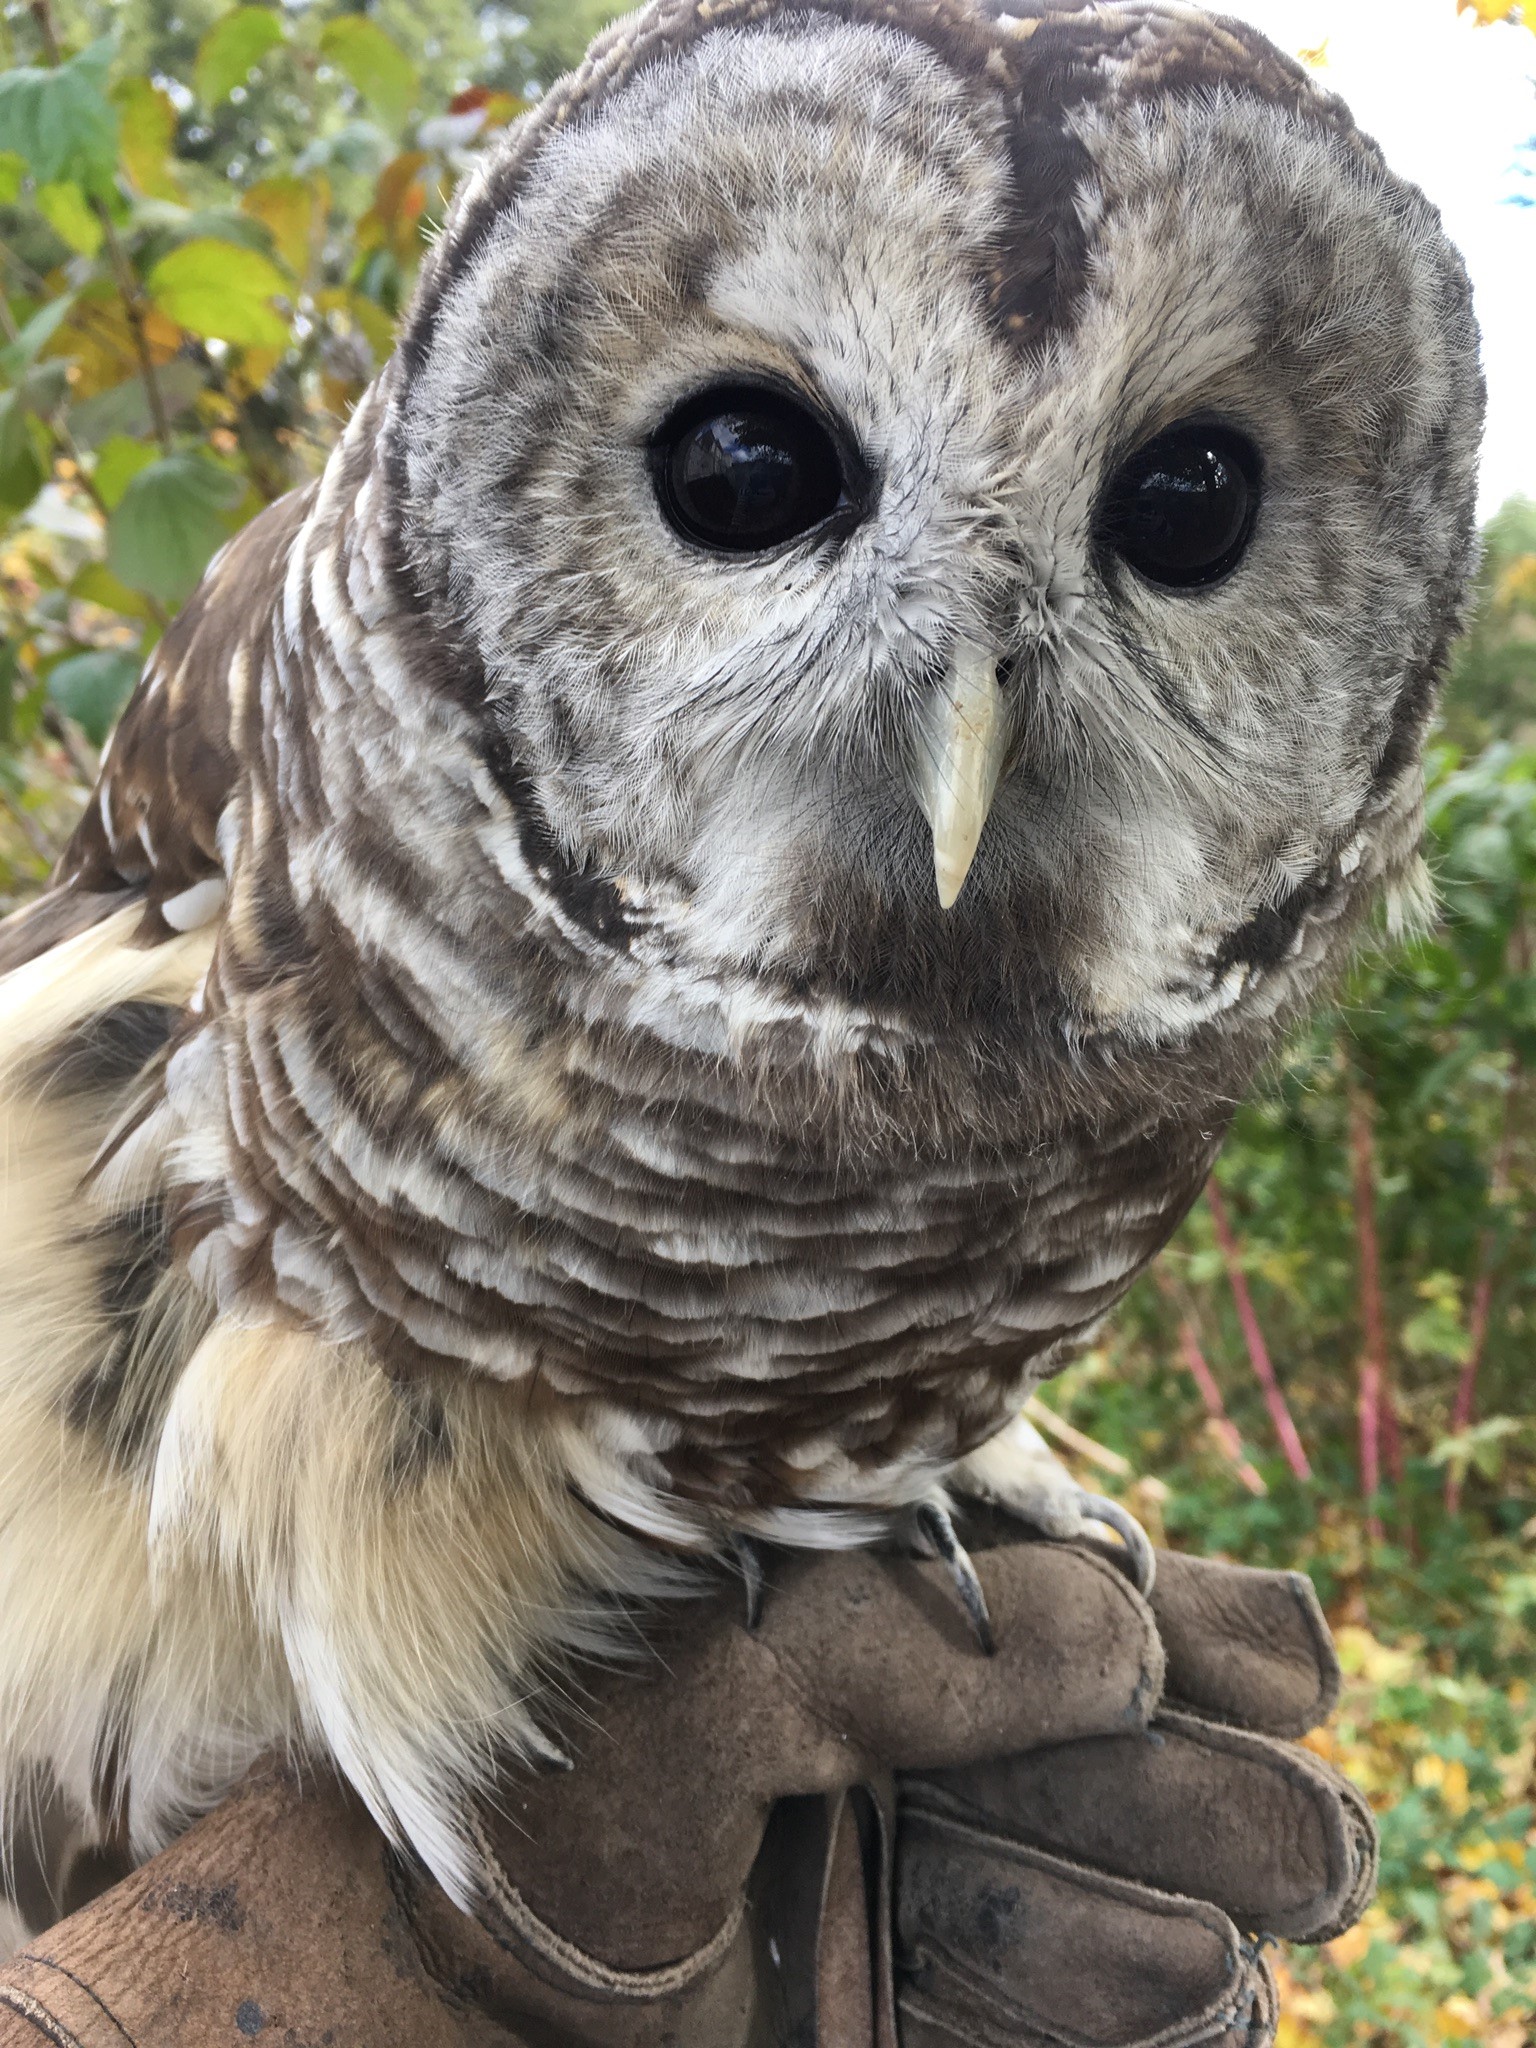 Shakespeare the Barred Owl